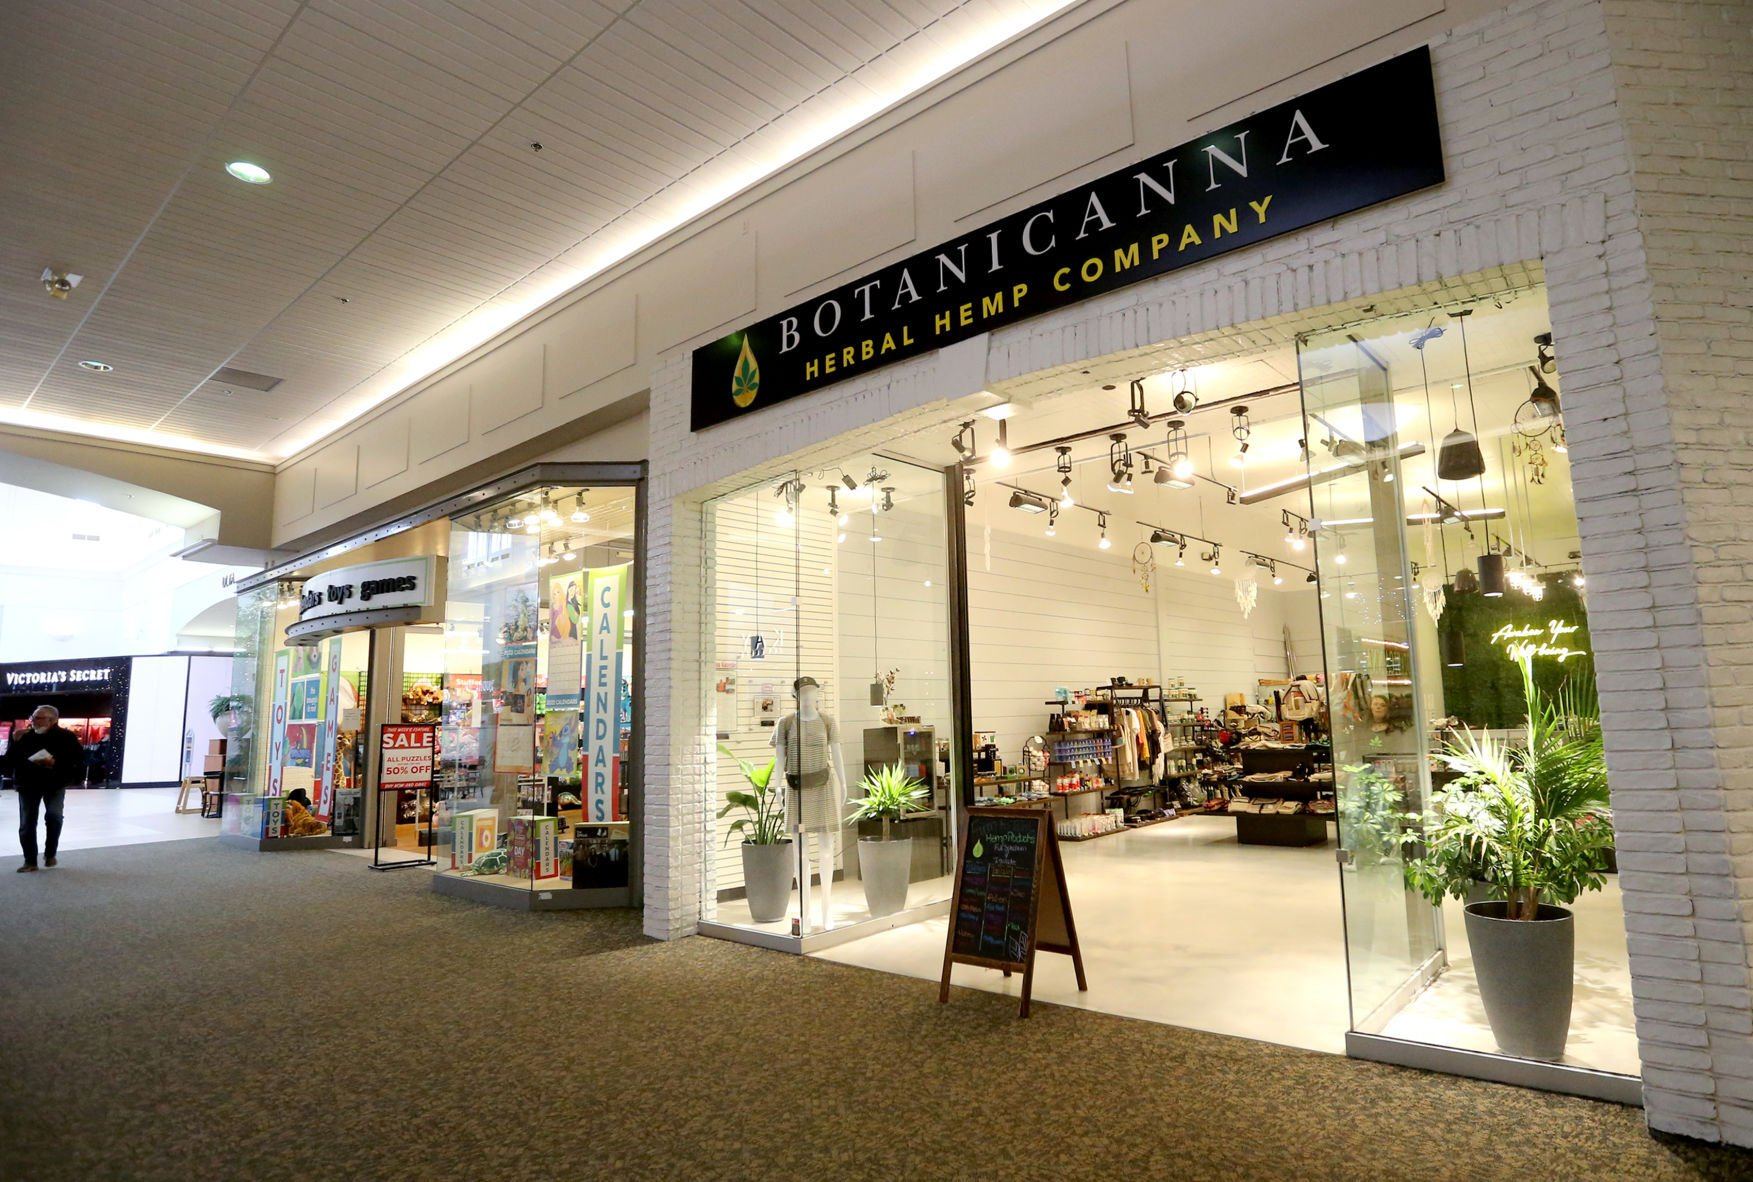 Botanicanna is located in Kennedy Mall in Dubuque.    PHOTO CREDIT: JESSICA REILLY